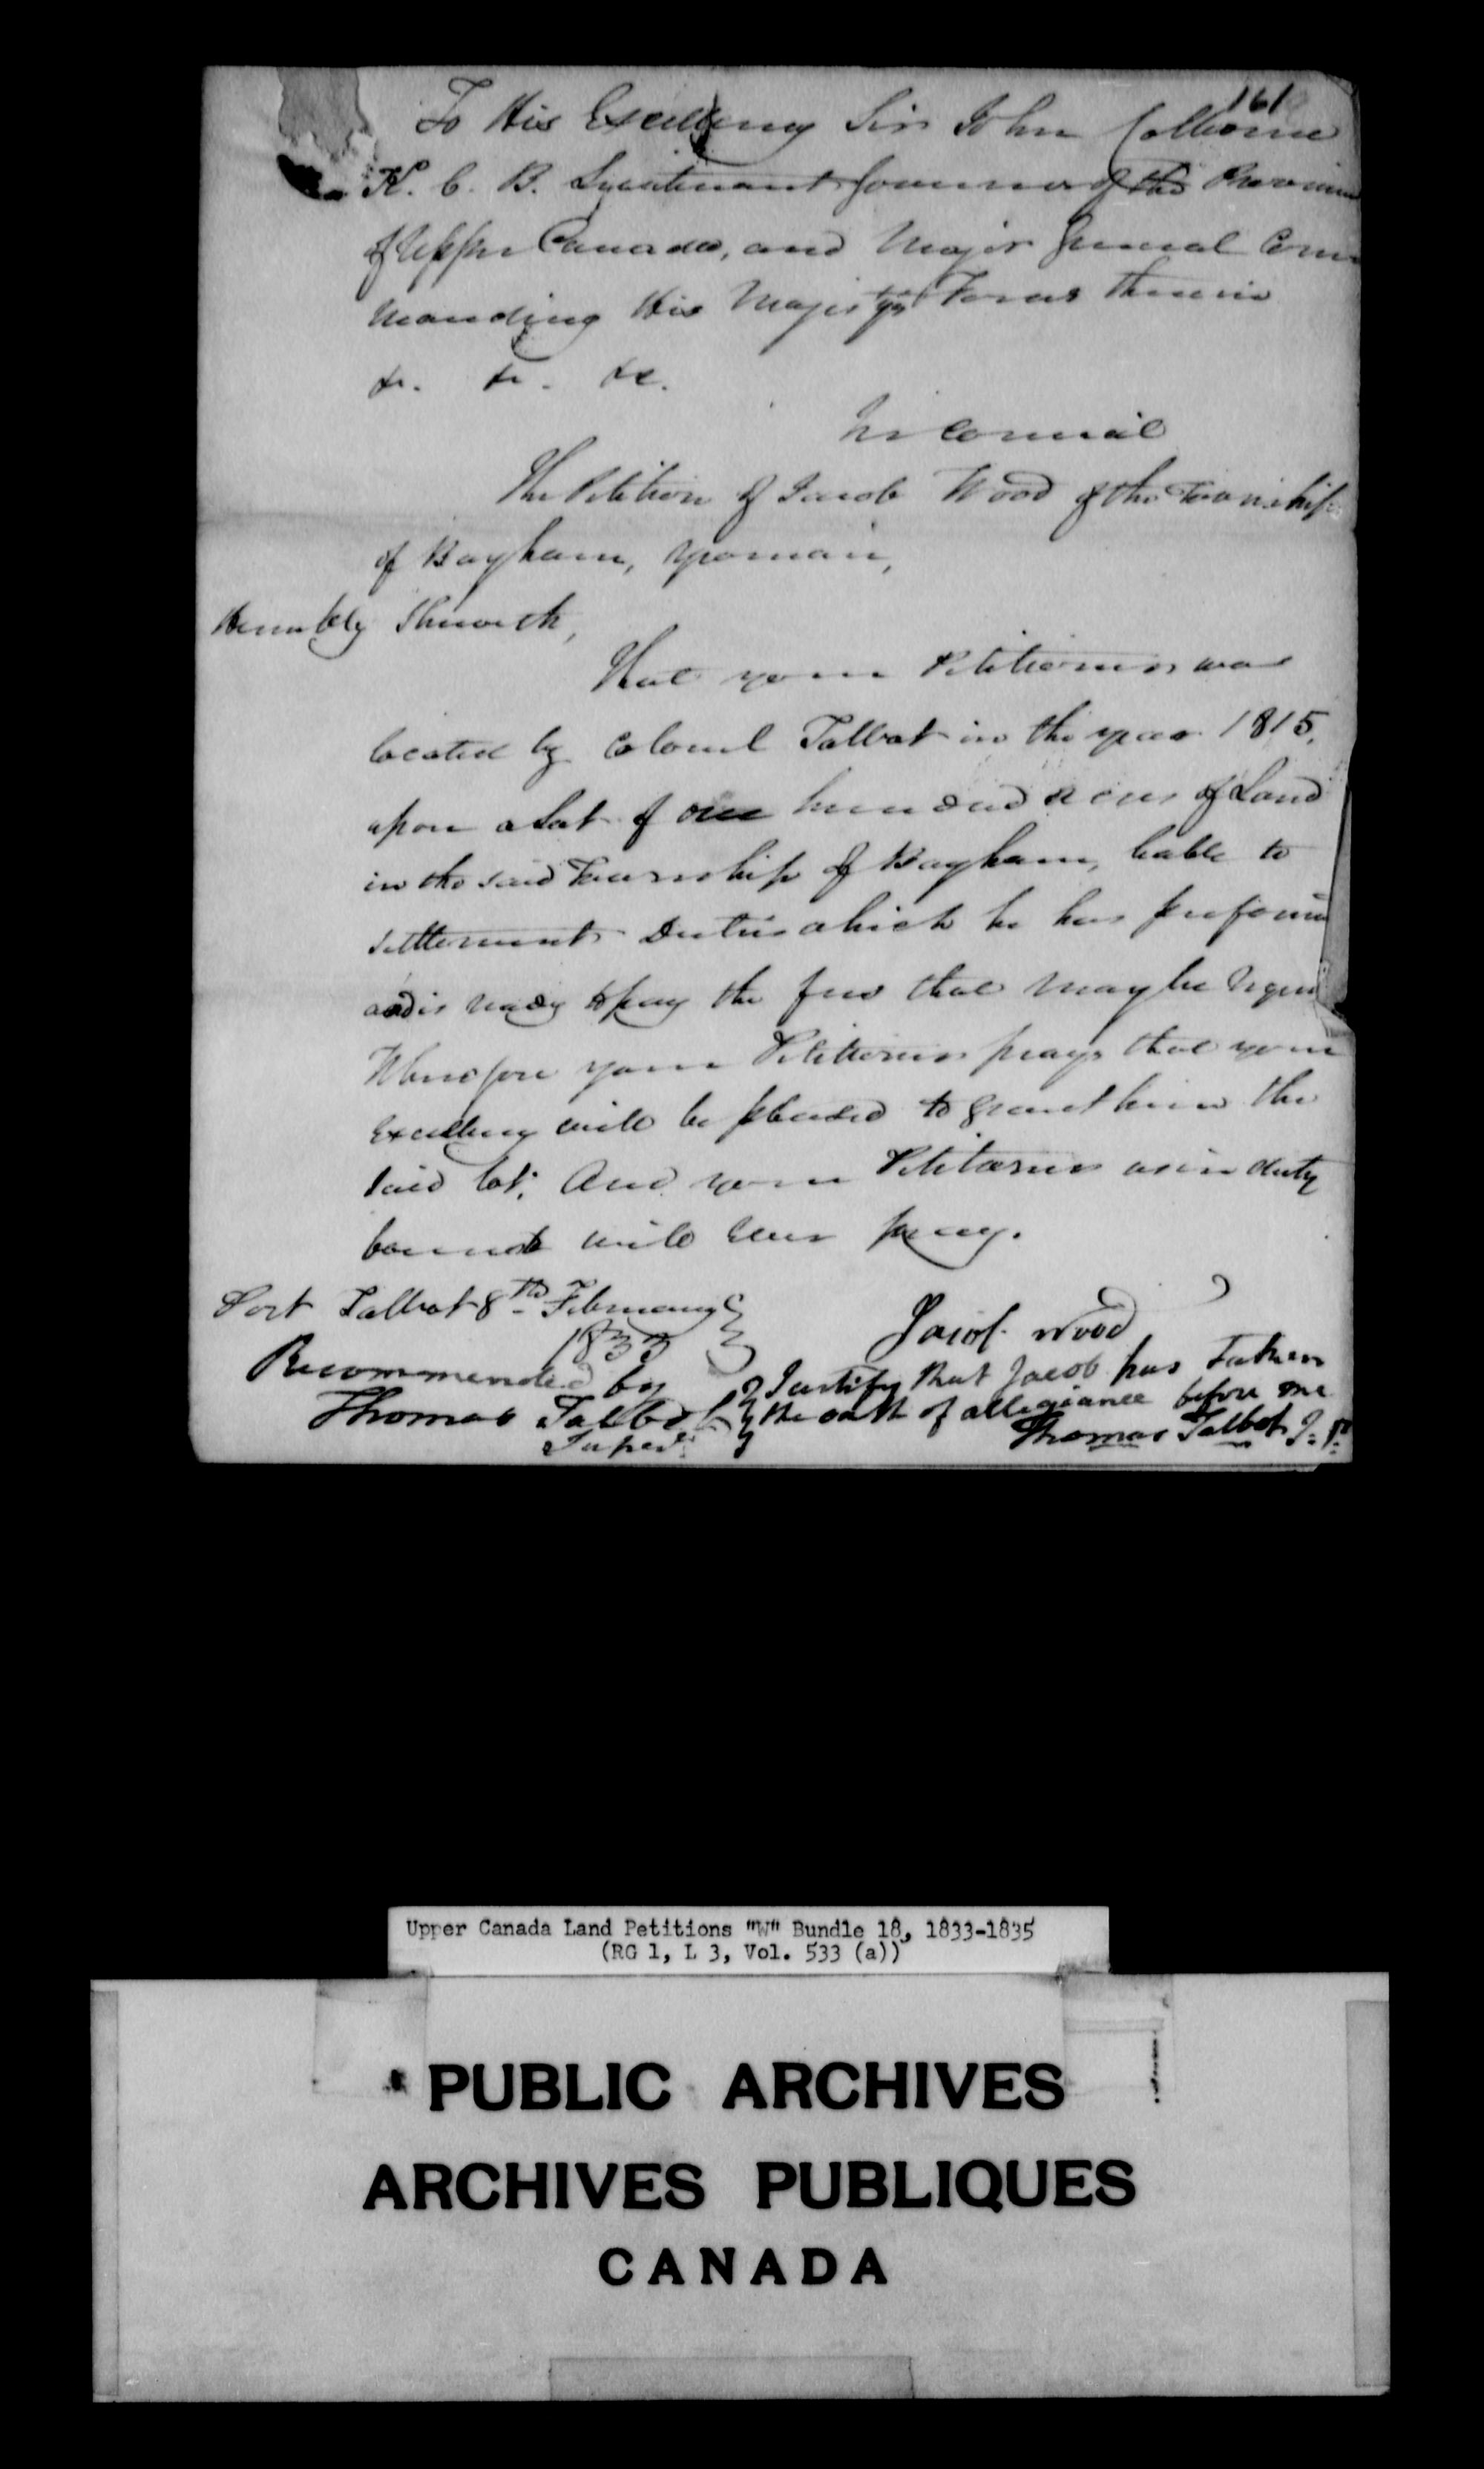 Title: Upper Canada Land Petitions (1763-1865) - Mikan Number: 205131 - Microform: c-2958